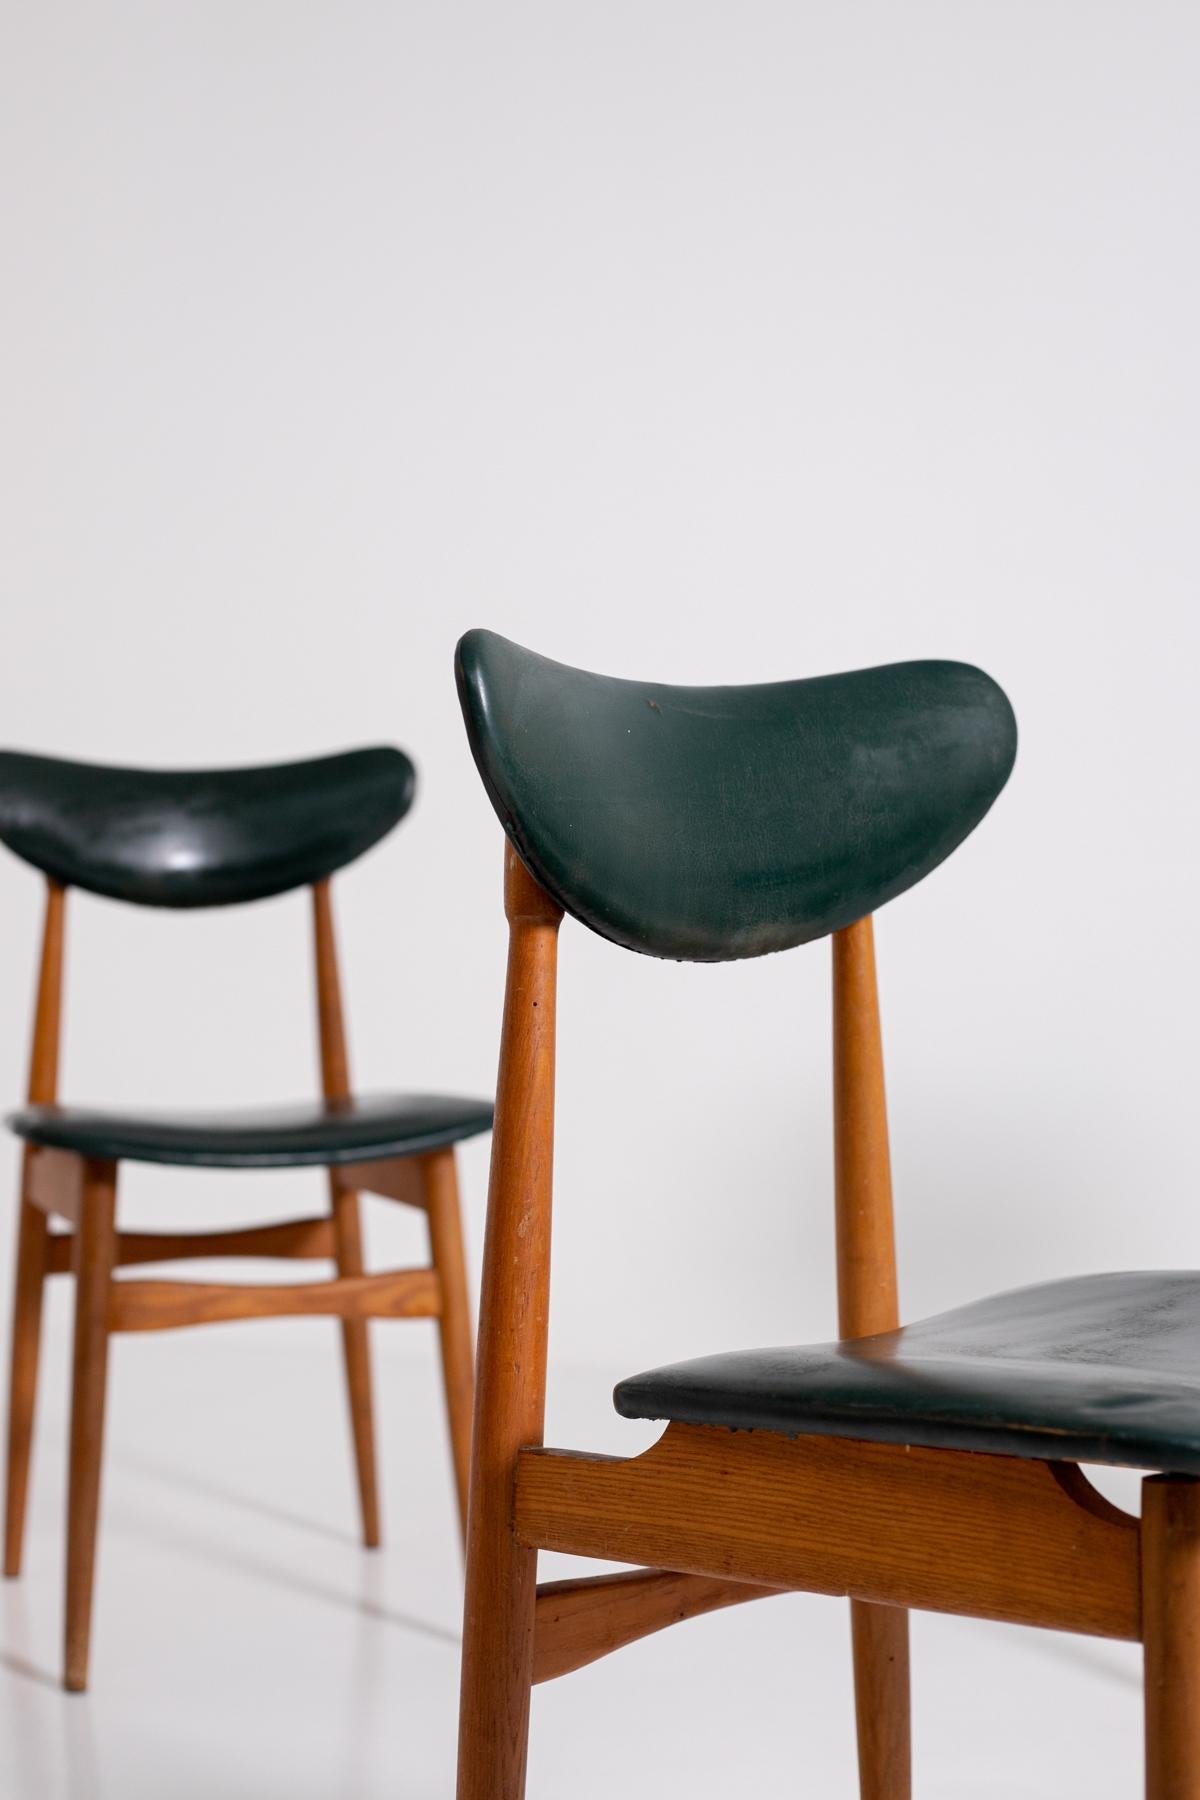 Swedish Set of Five Nordic Chairs in Green Leather and Wood, 1950s